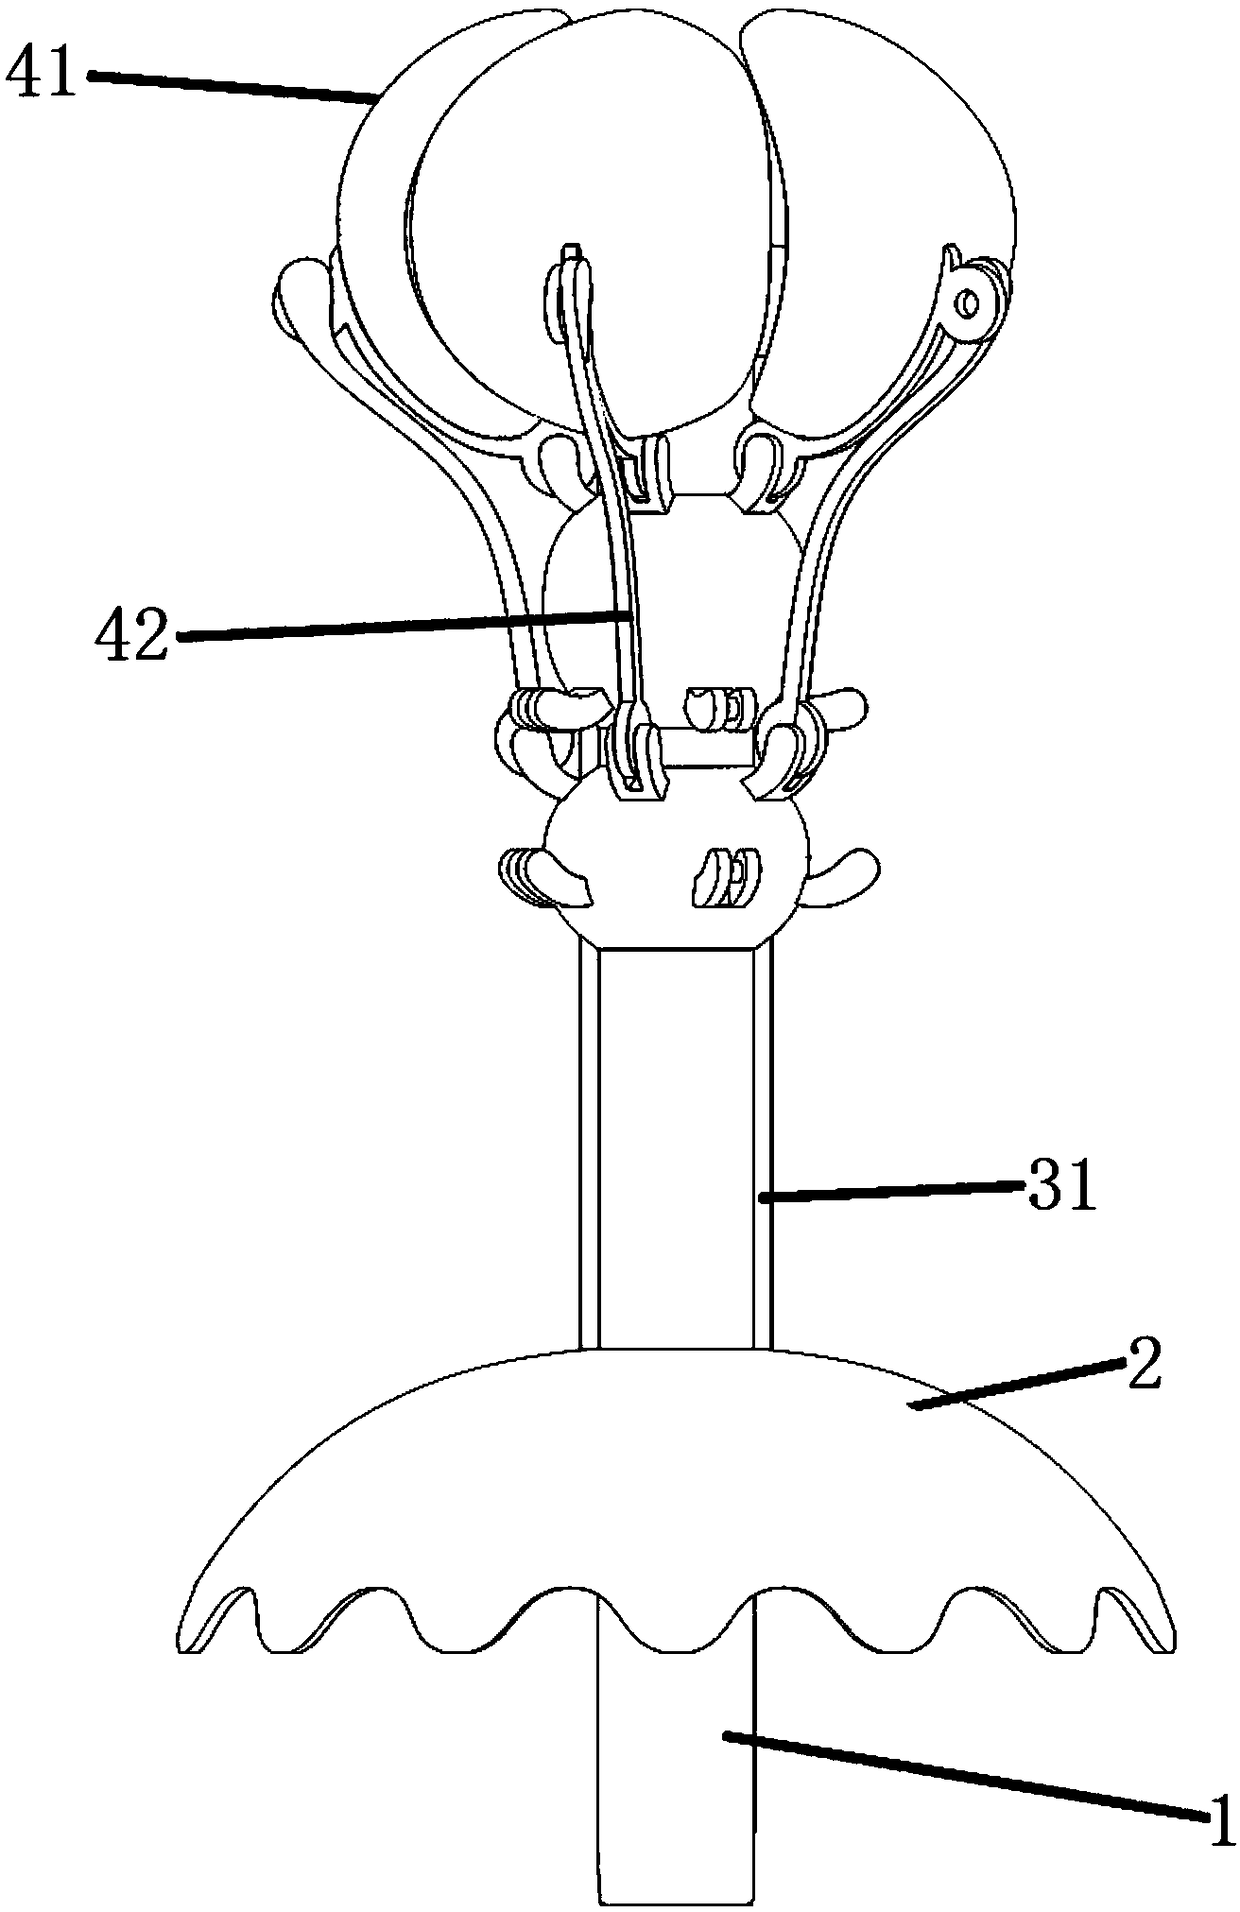 A petal opening and closing device